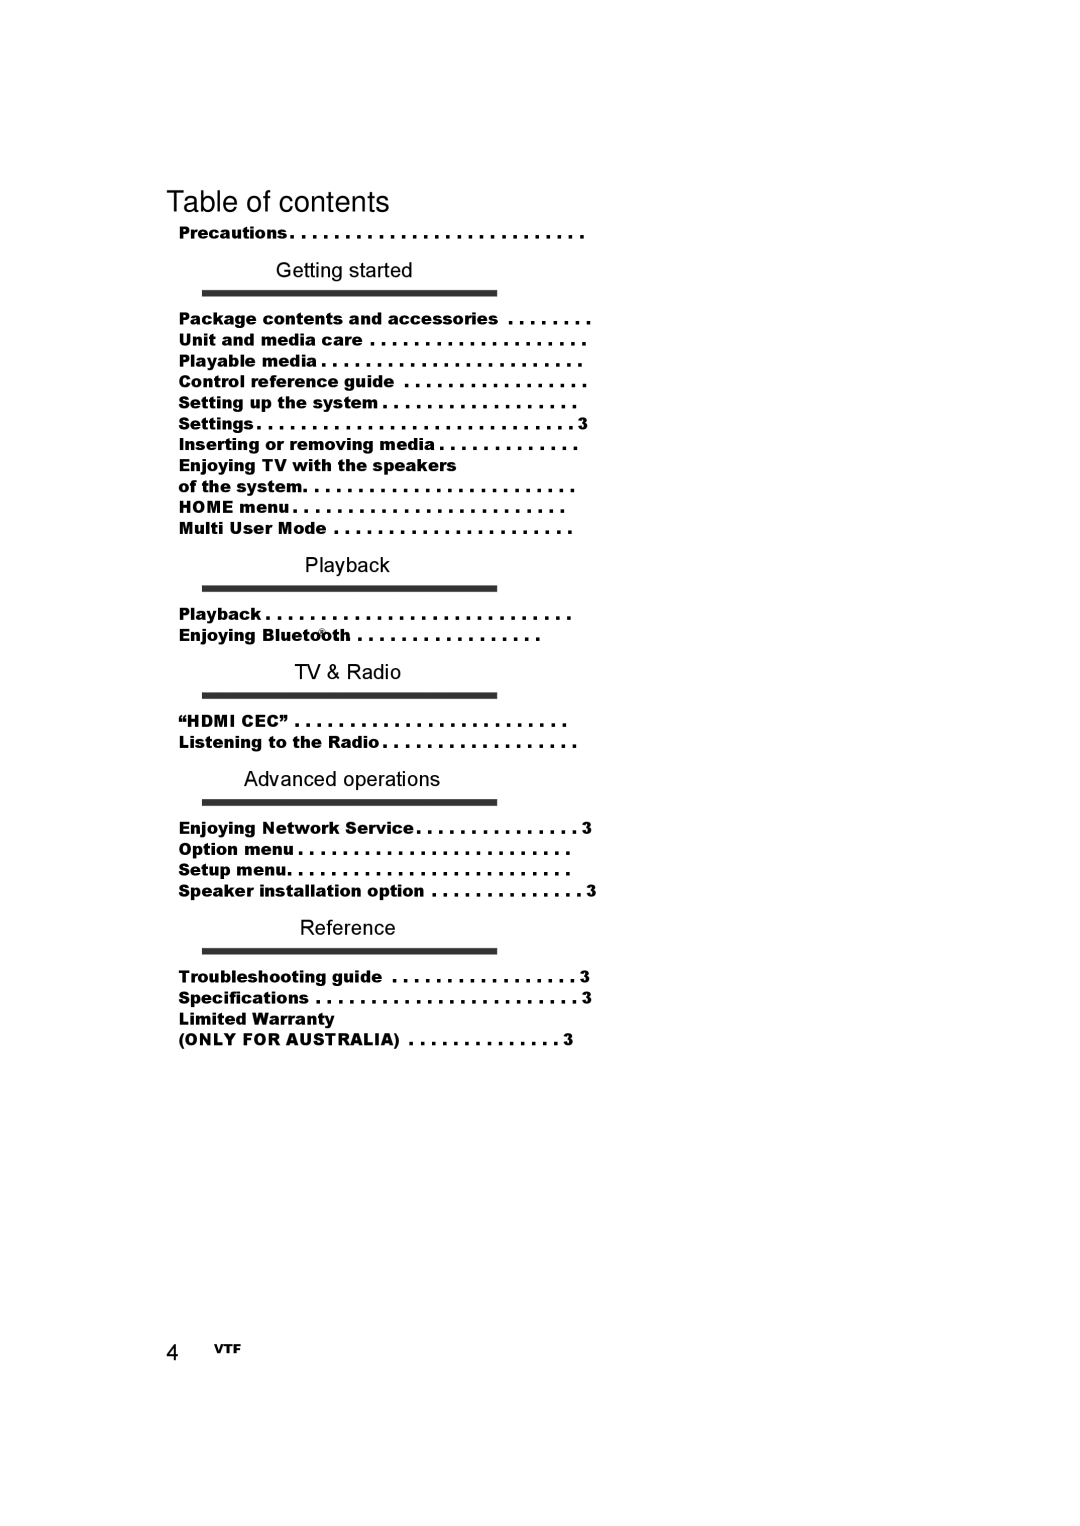 Panasonic SC-BTT405, SC-BTT465, SC-BTT785, SC-BTT433 owner manual Table of contents 